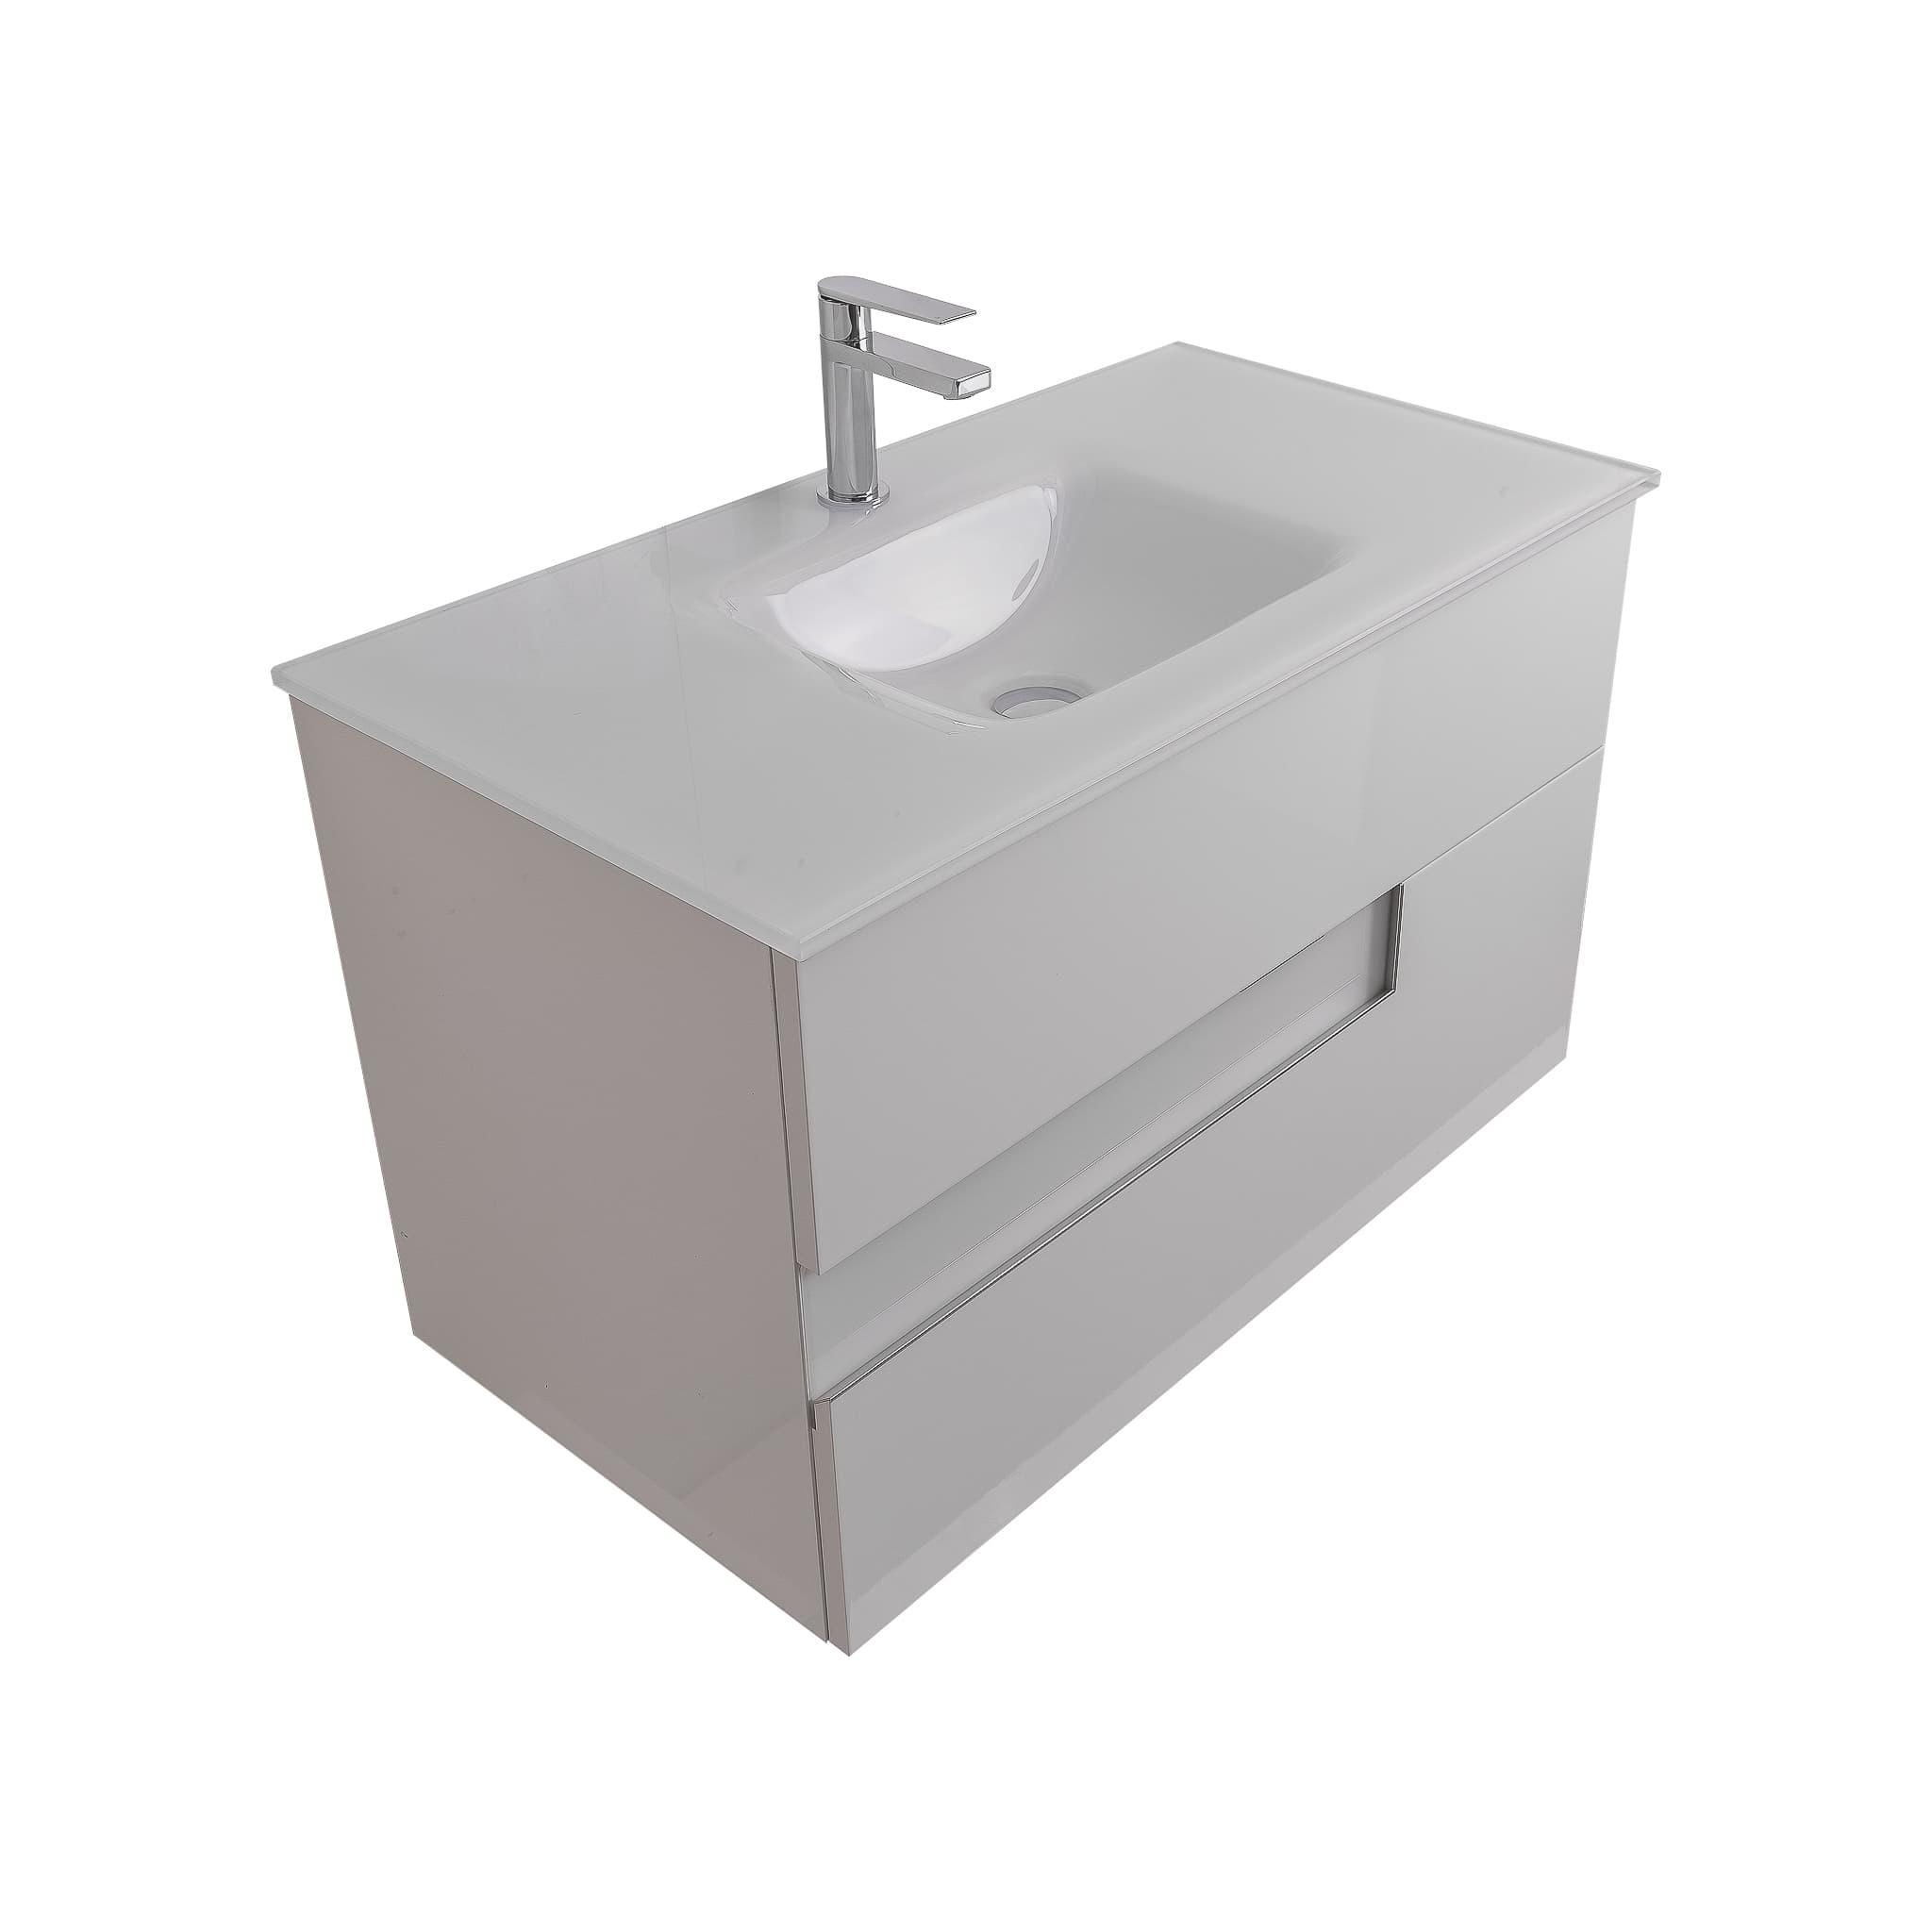 Vision 39.5 White High Gloss Cabinet, White Tempered Glass Sink, Wall Mounted Modern Vanity Set